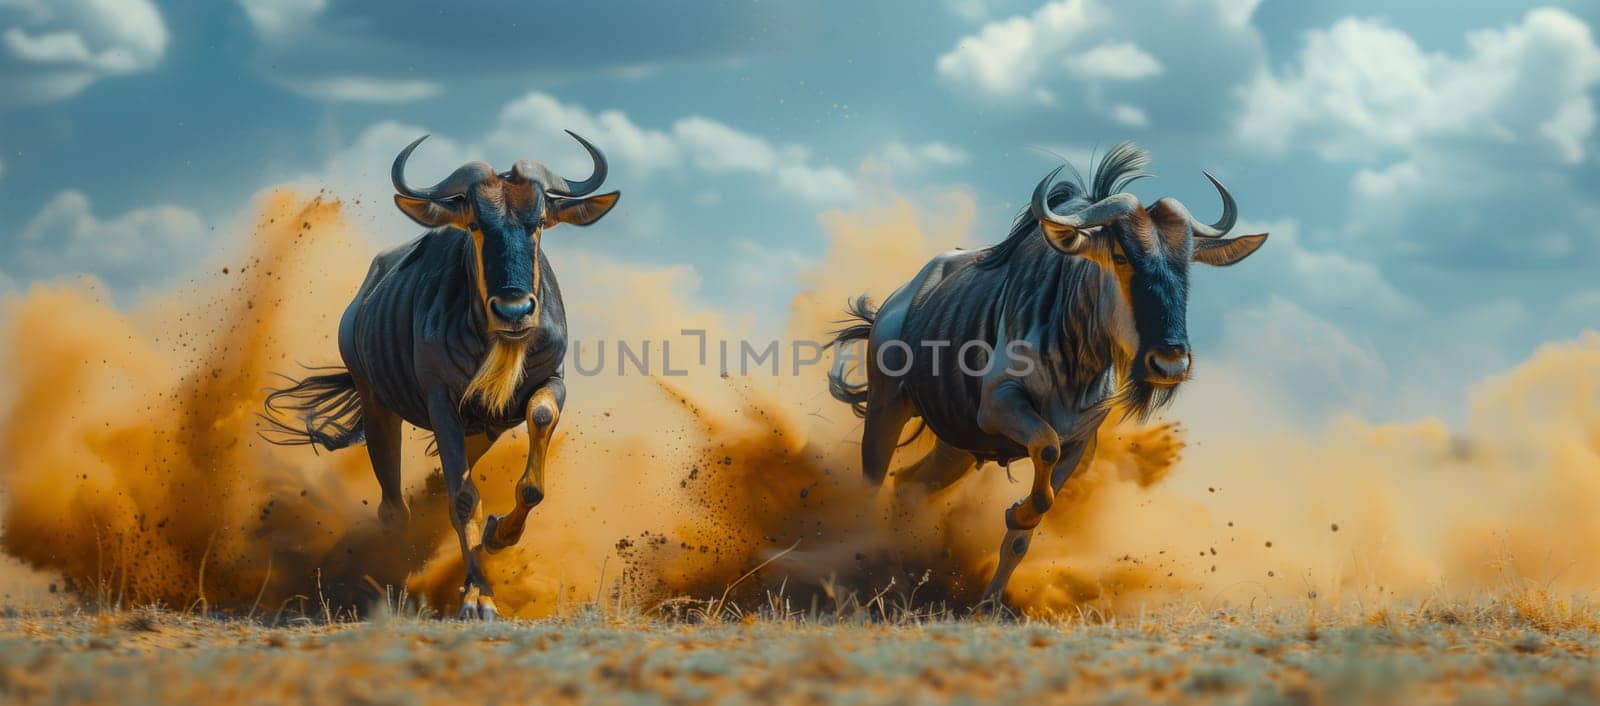 Two wild pack animals running across a dusty landscape under a cloudy sky by richwolf